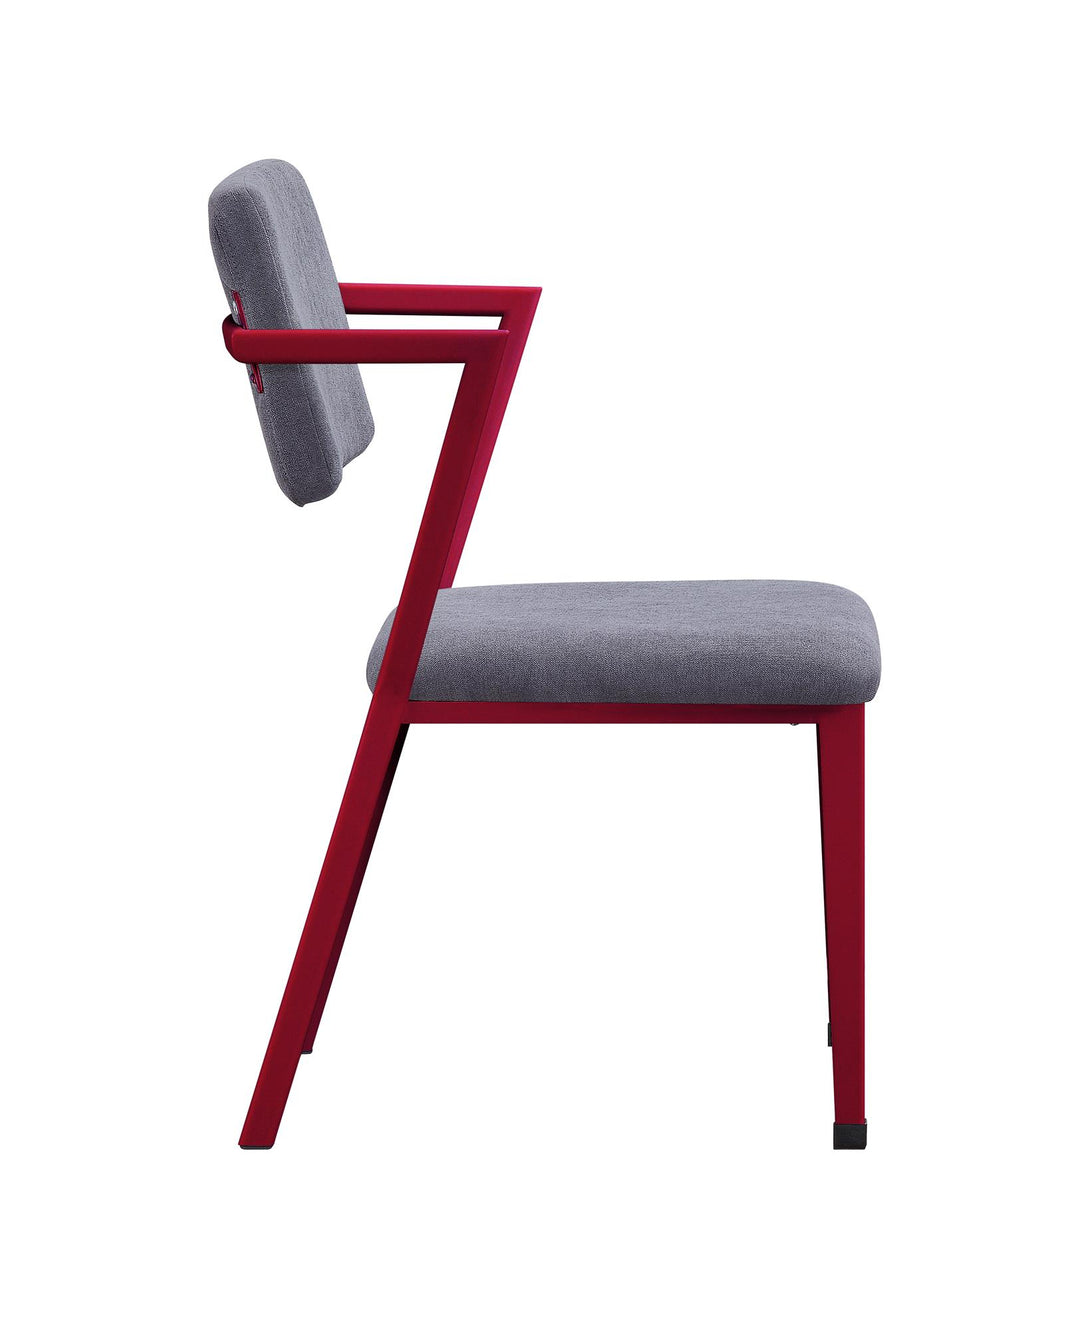 fashionable chair for bedroom - Red